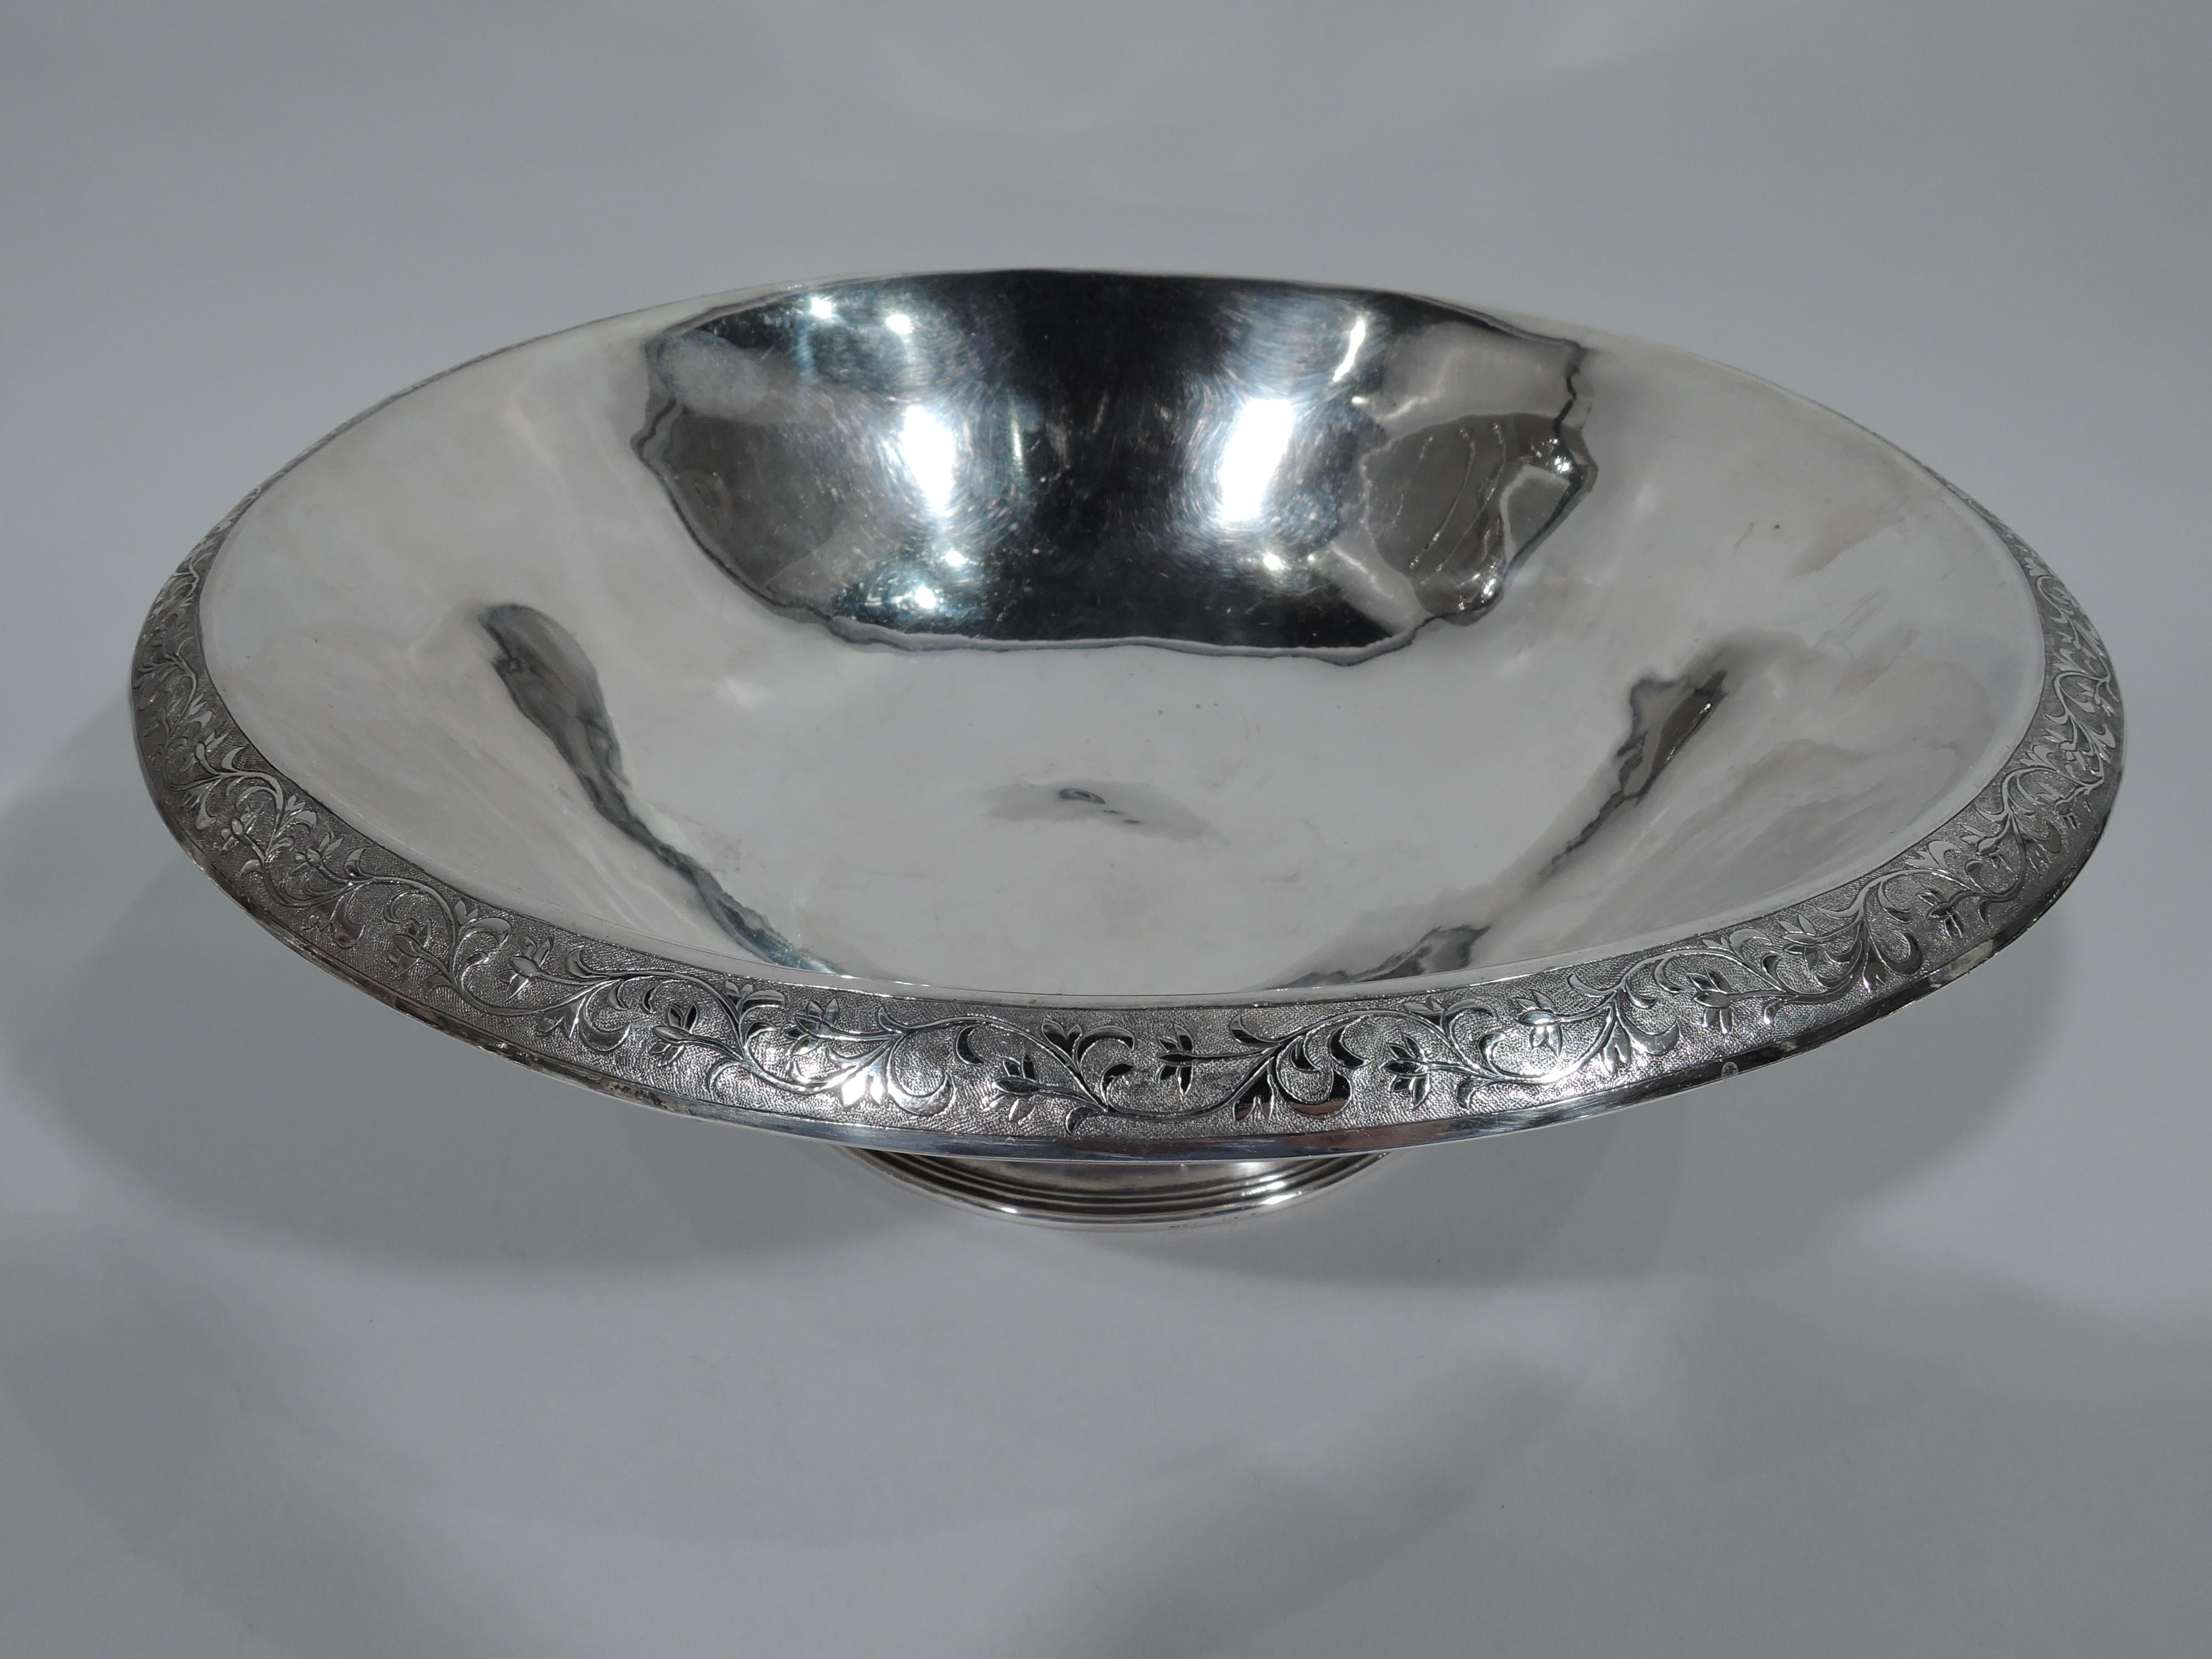 Chinese Export silver bowl, circa 1900. Curved and tapering with spread and reeded foot. Rim turned-down with chased scrolling and leafing branch on stippled ground. Chinese marks. Weight: 18.4 troy ounces.